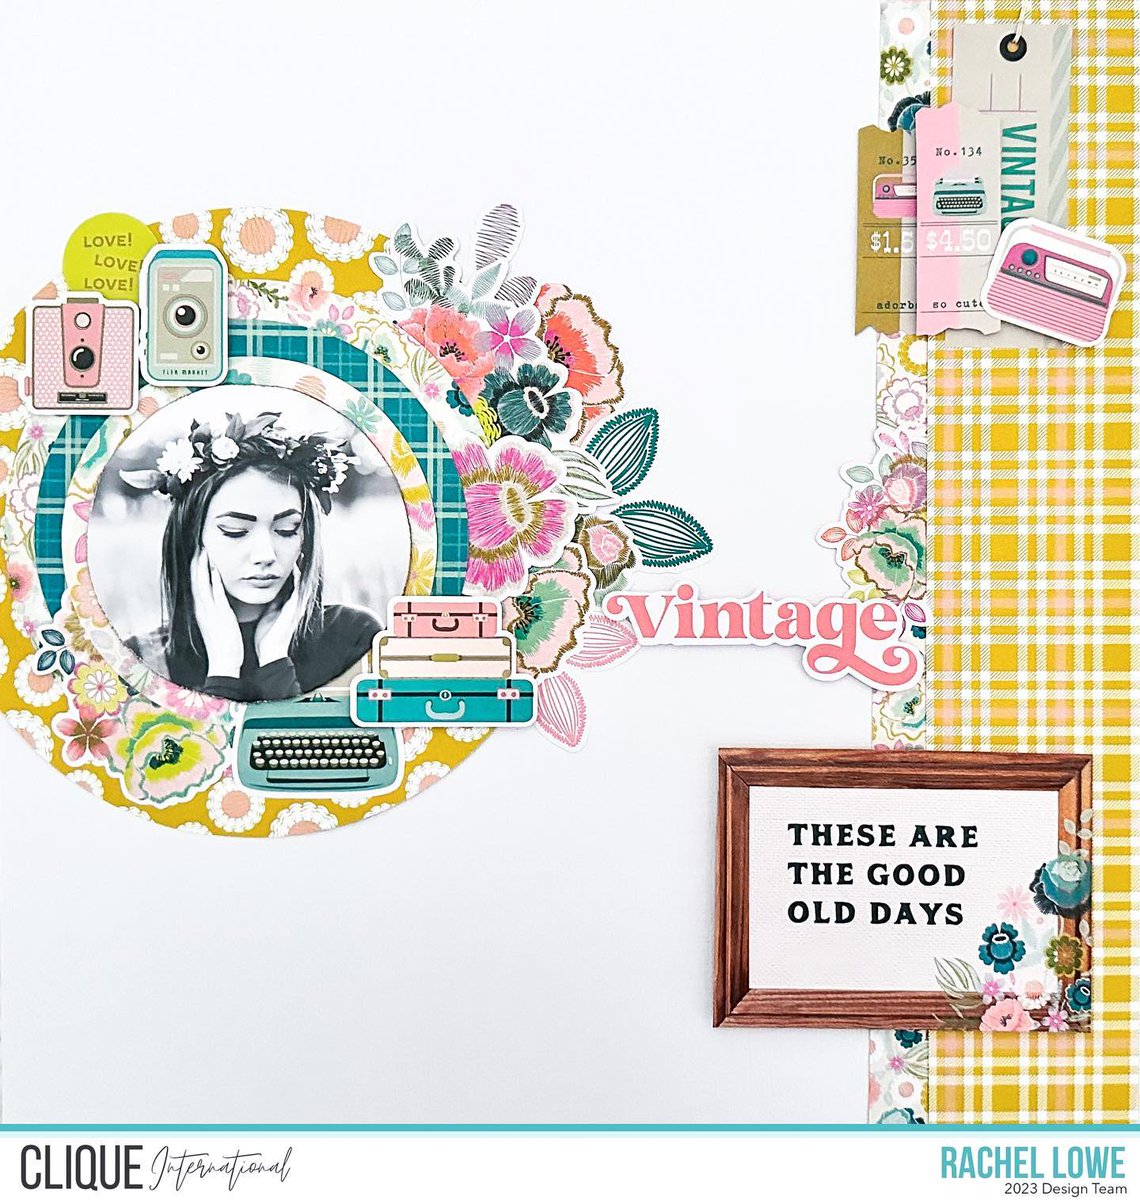 These are the good old days!  This darling vintage style layout was created by @rachellowe____. 

#cliqueinternational
#scrapbooking
#scrapbookingkit
#scrapbookingkits
#papercrafting
#scrapbookingideas
#memorykeeping
#diecuts
#mixedmediascrapbooking
#scrapbooker
#scrapbookpage
#